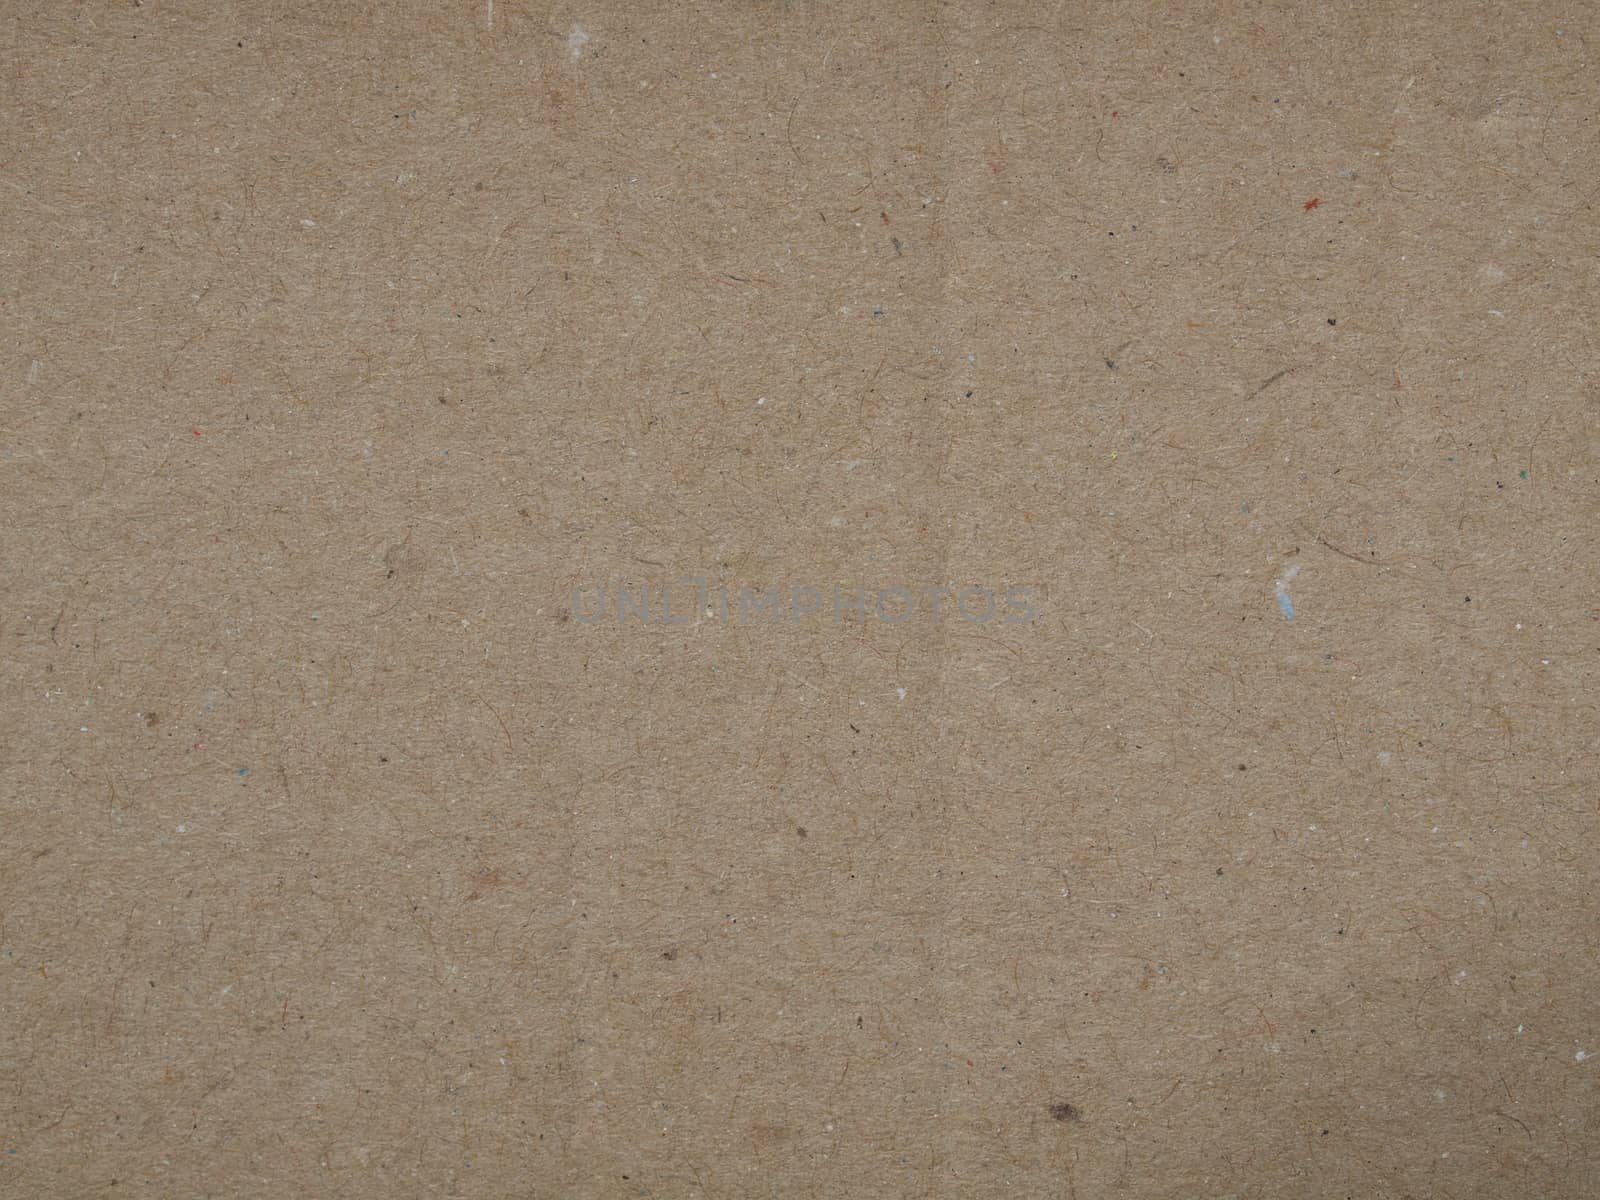 Blank sheet of old brown paper useful as a background